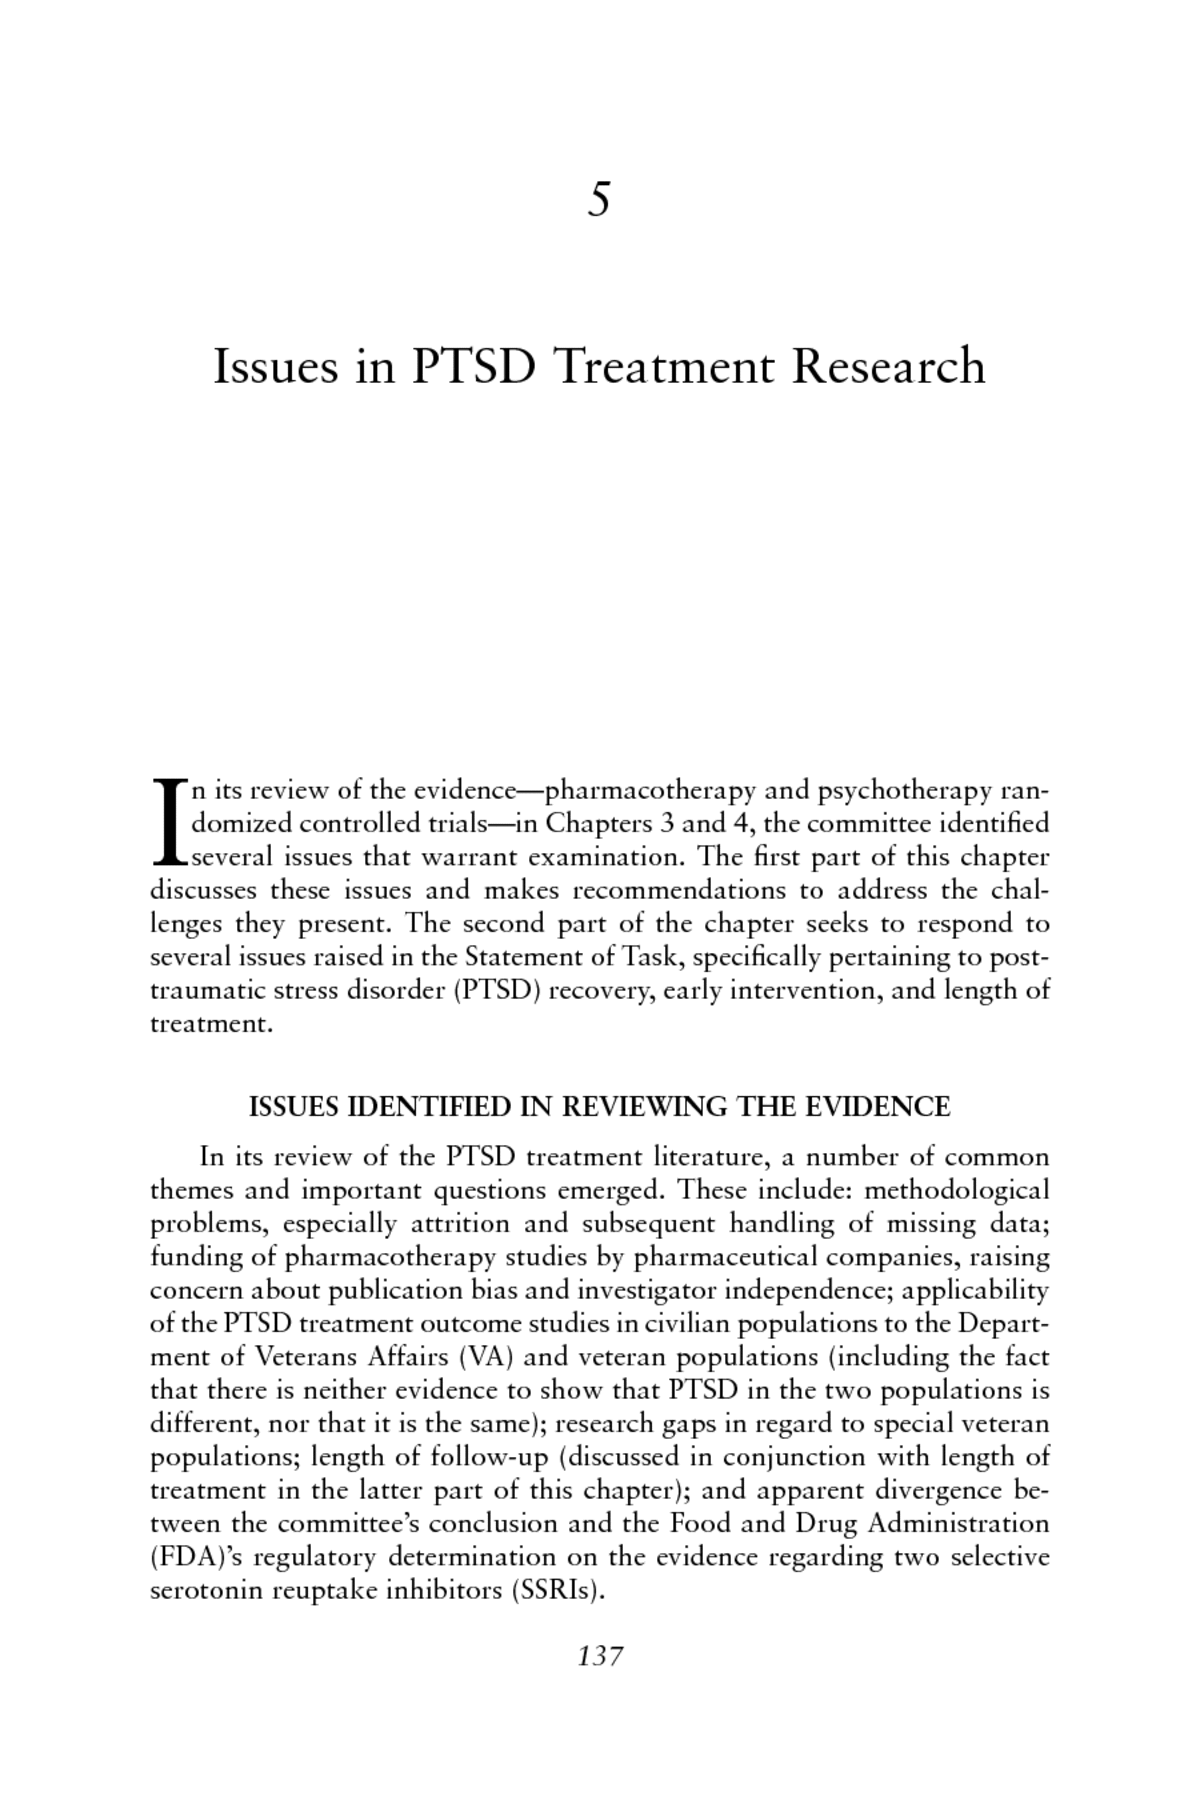 thesis statement for ptsd in veterans